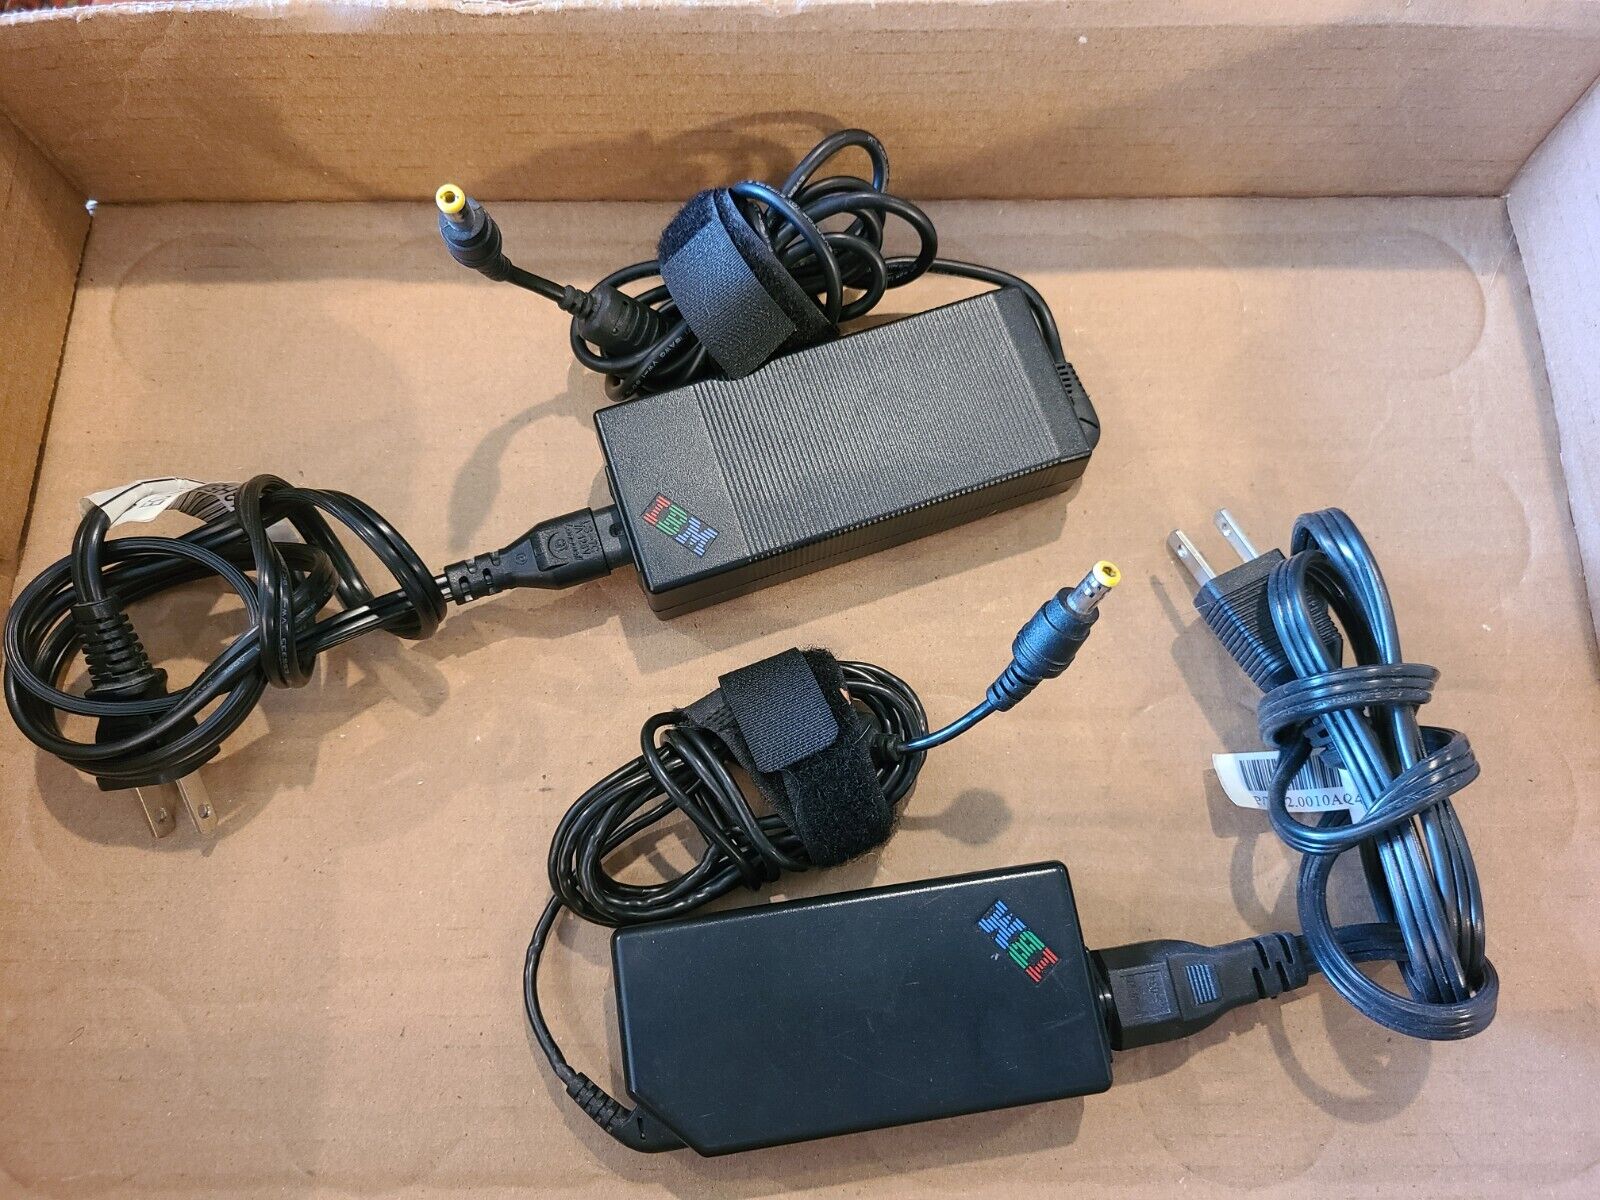 Pair of genuine IBM 16V (3.5A and 4.5A) Power Adapters for Thinkpad Laptops